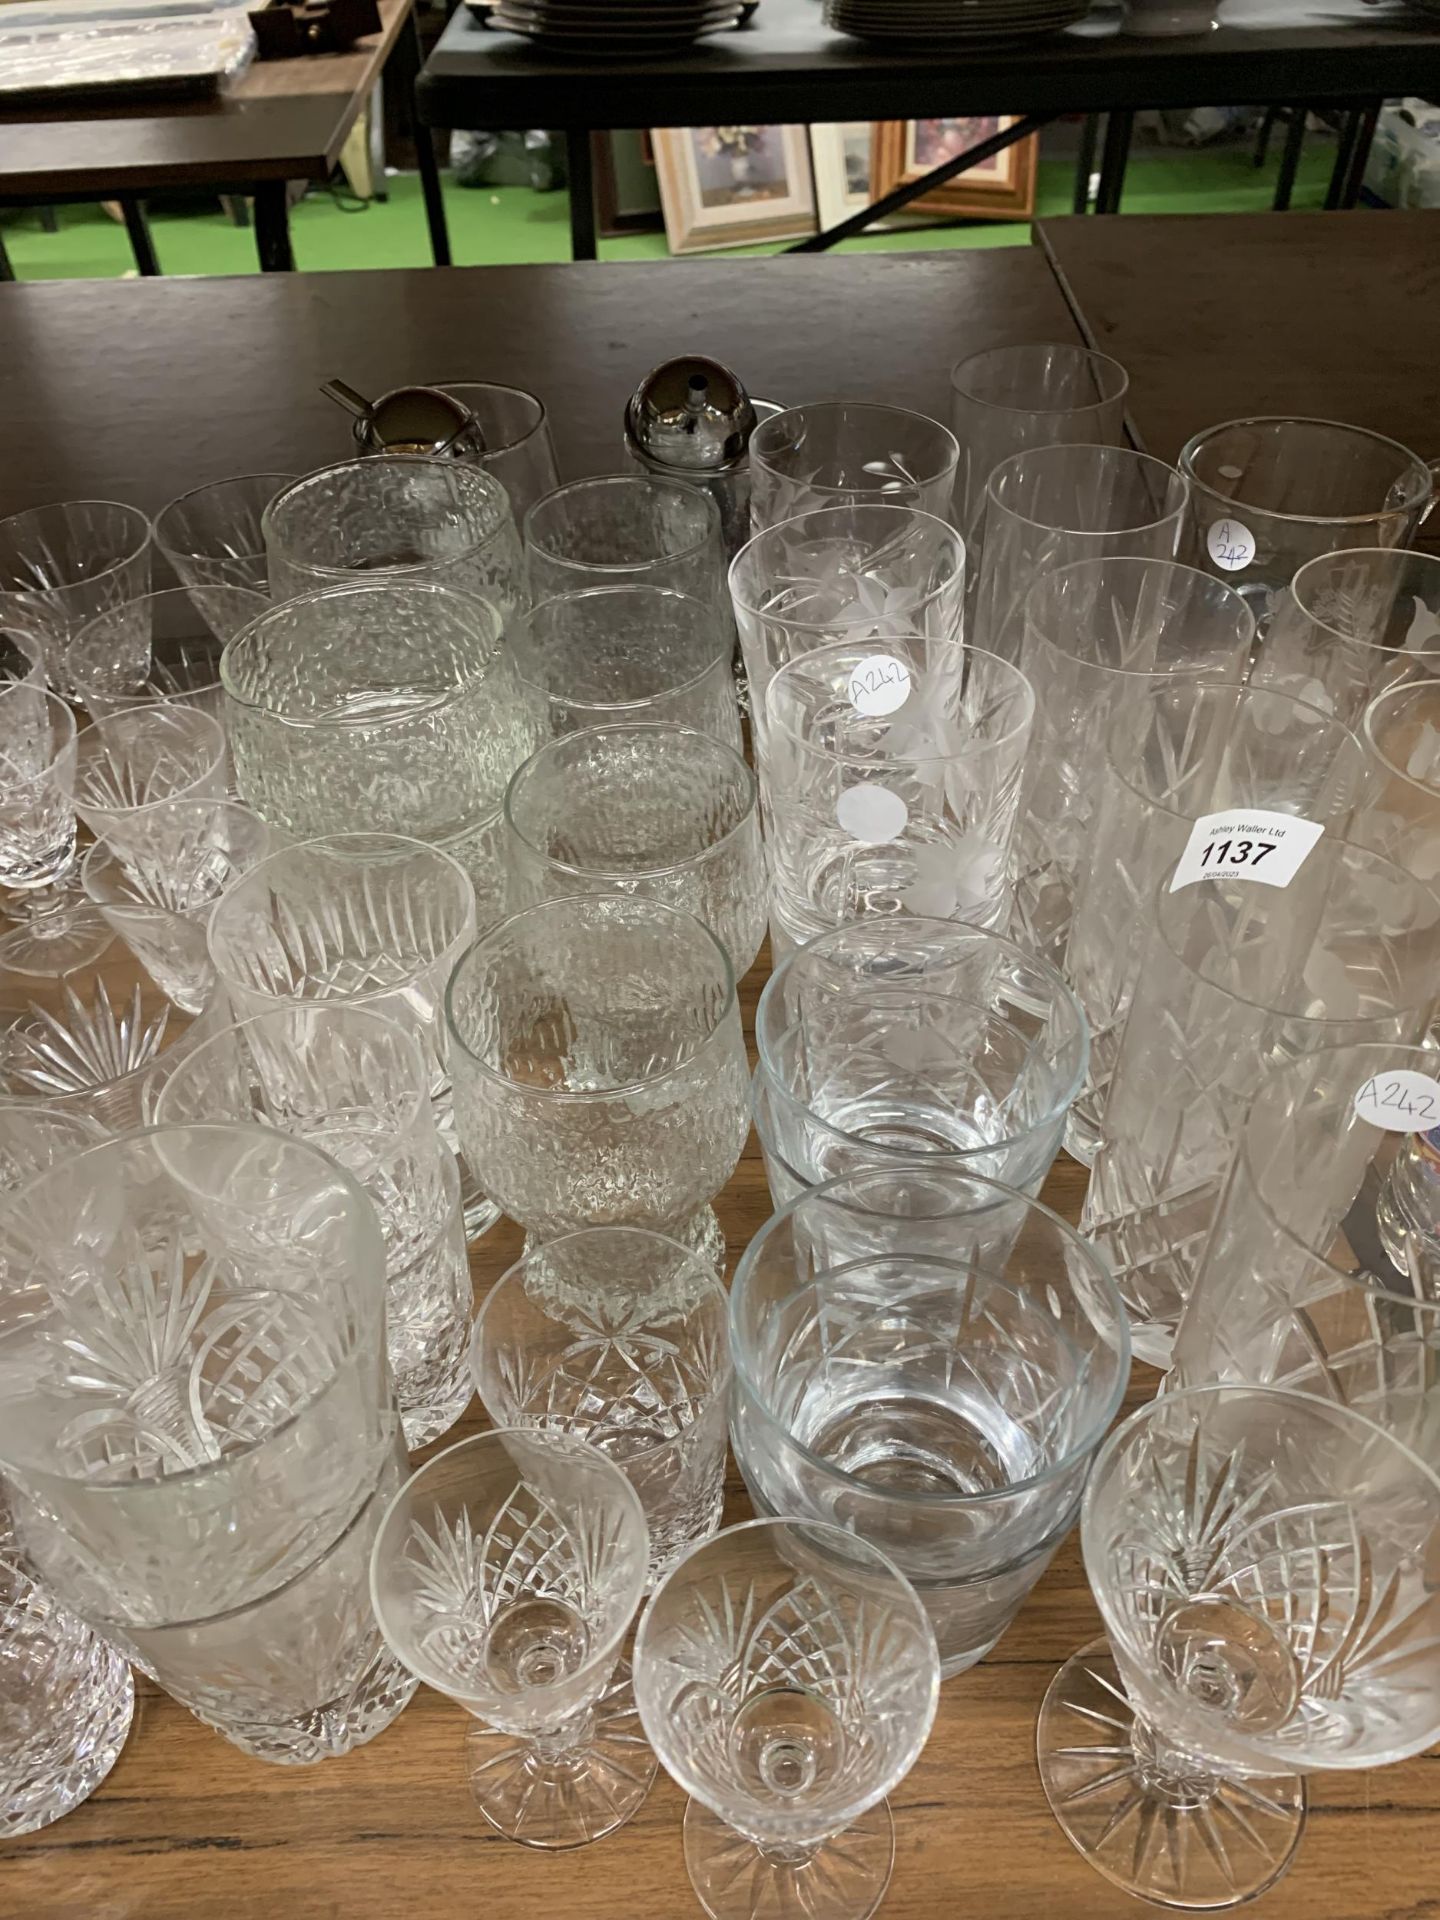 A LARGE QUANTITY OF GLASSES TO INCLUDE TUMBLERS, WINE, SHERRY, DESSERT BOWLS, WINE POURERS, ETC - Image 3 of 4